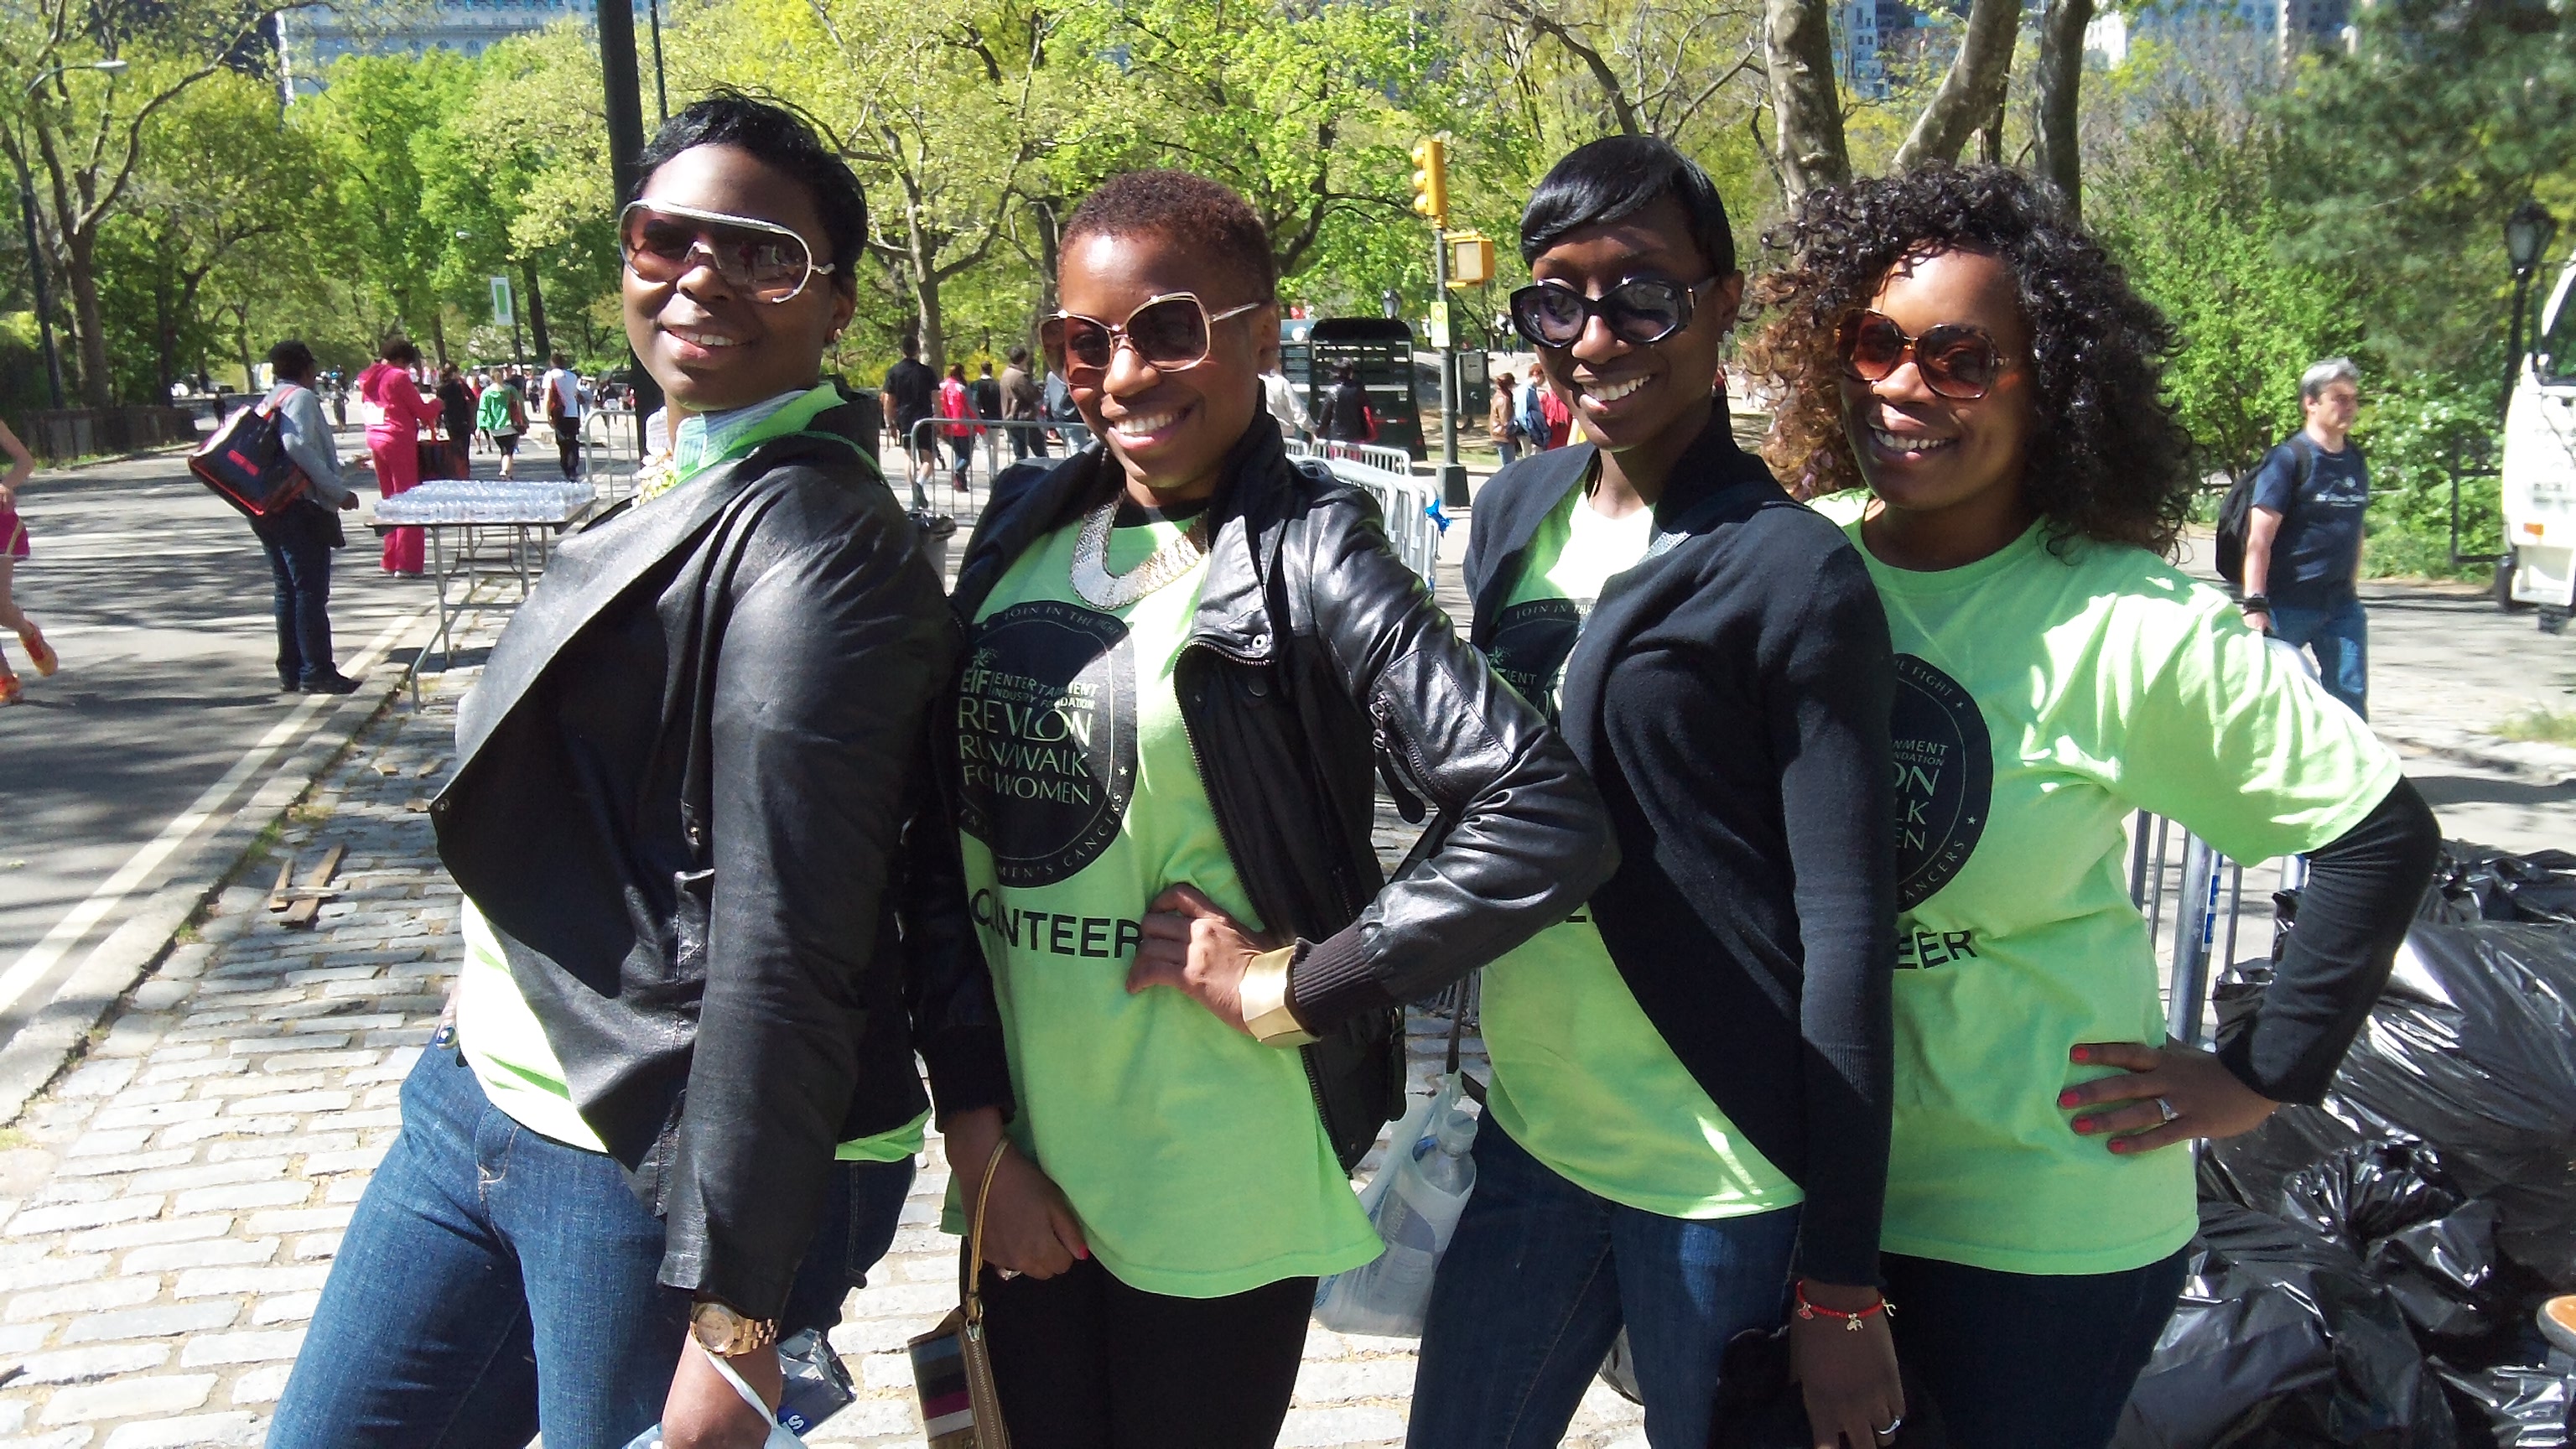 Embrace Her Community Launches at the Revlon Run/Walk!